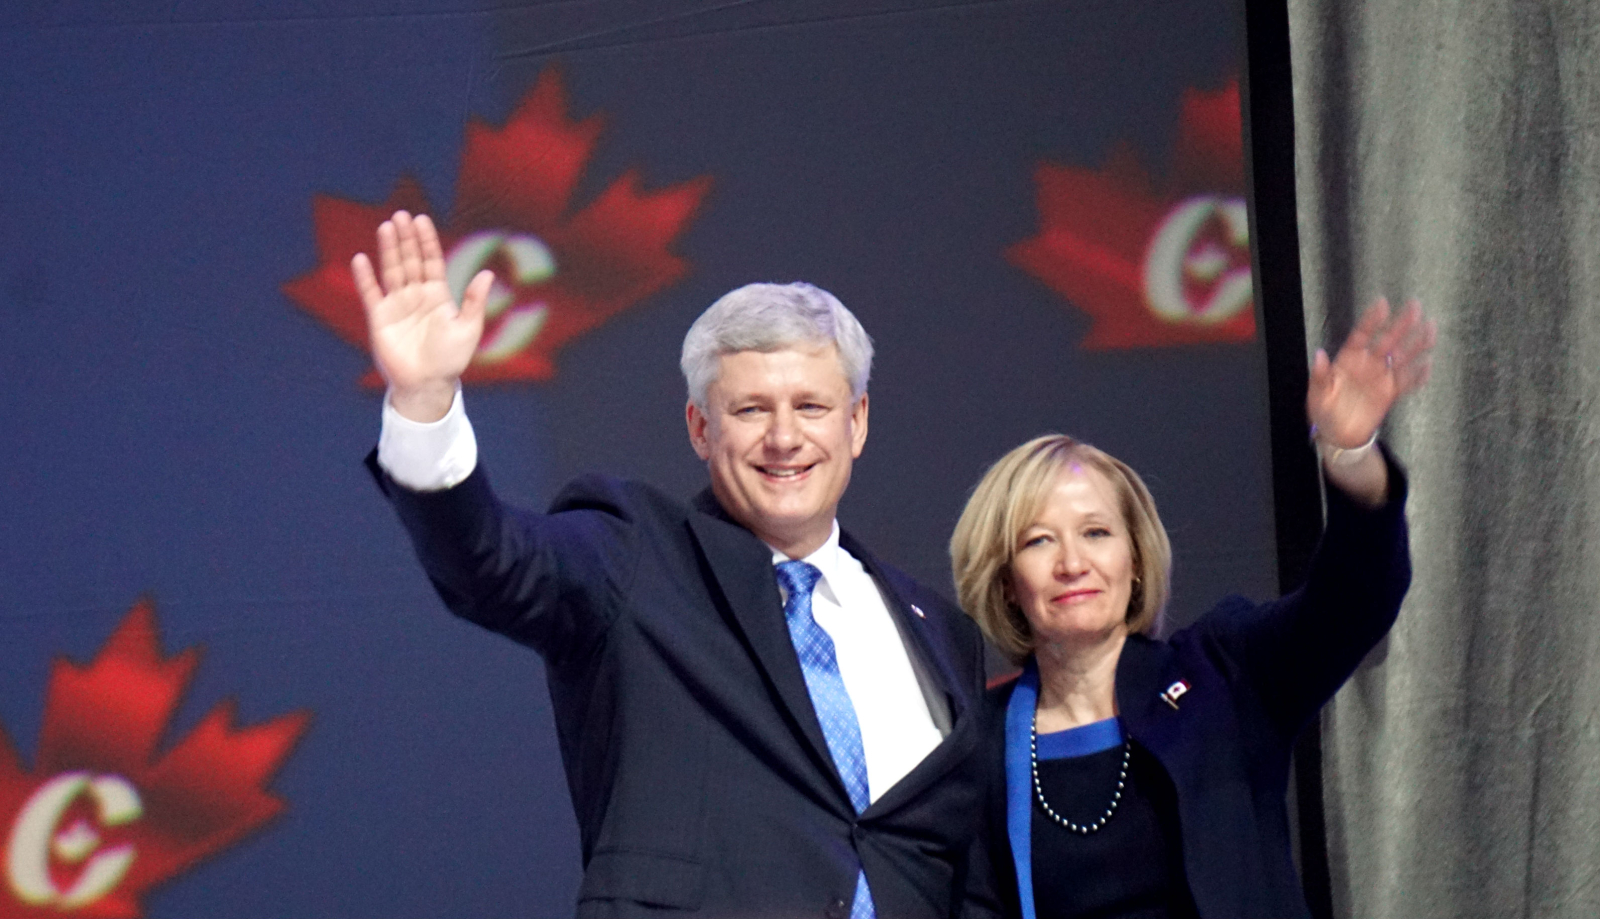 Stephen Harper, Conservative Convention, Tory, Calgary-Heritage, Vancouver